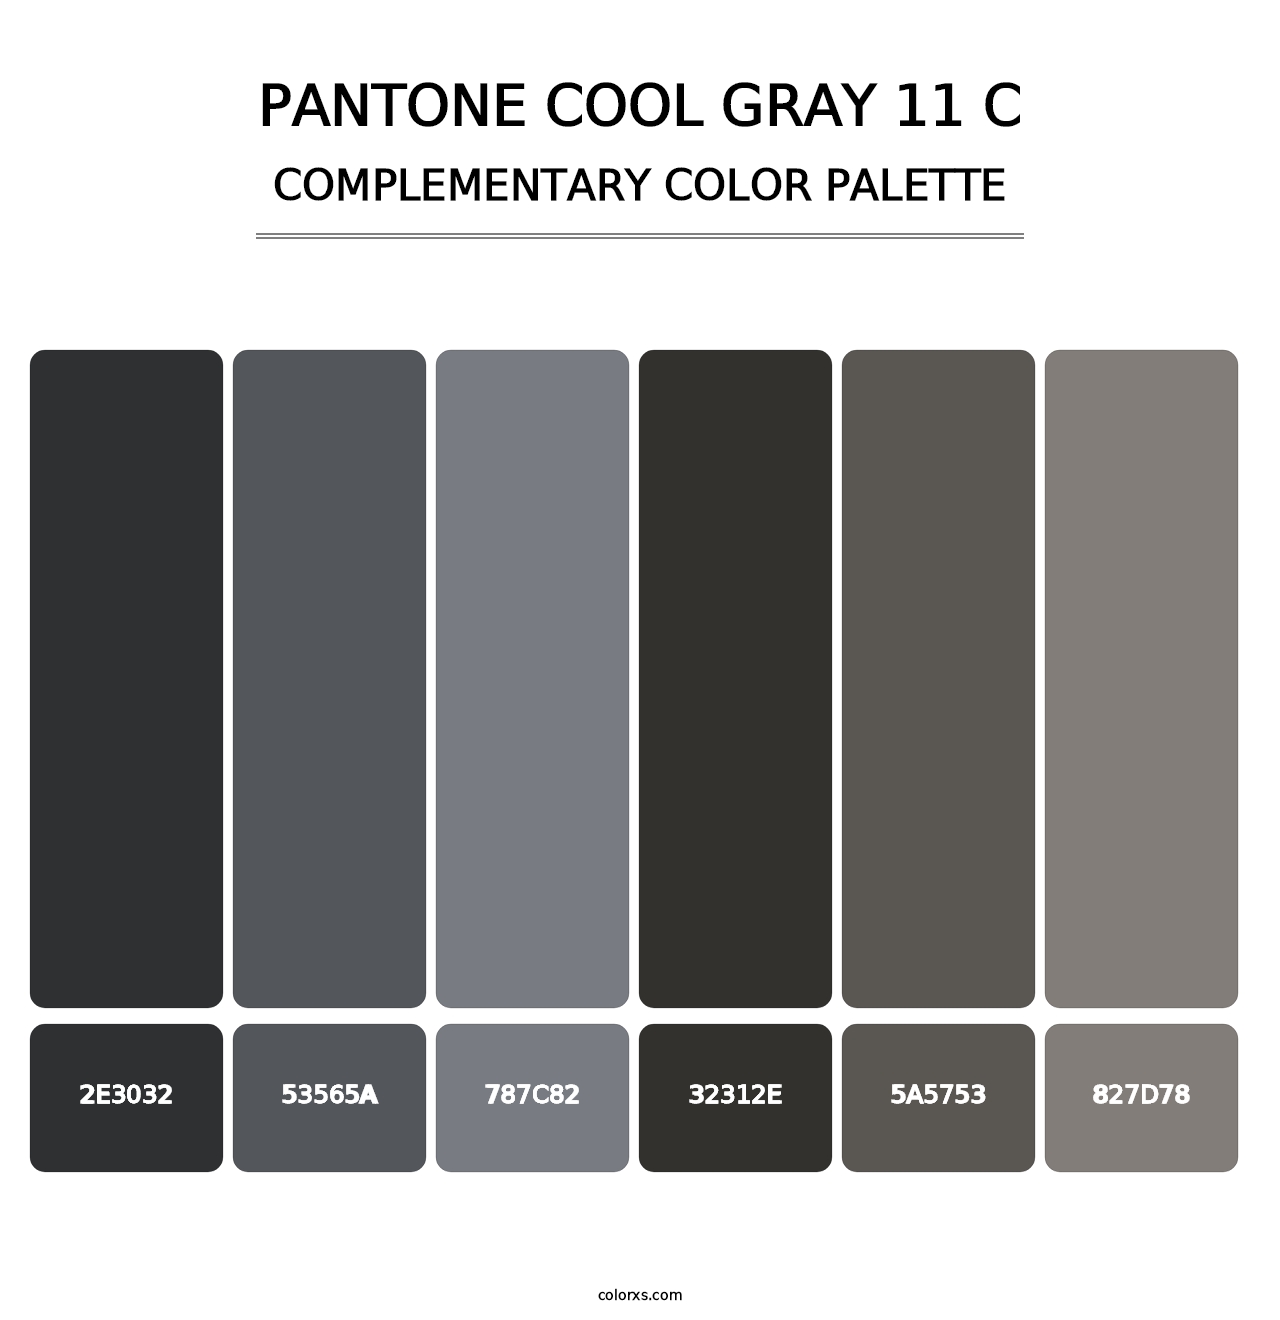 PANTONE Cool Gray 11 C - Complementary Color Palette